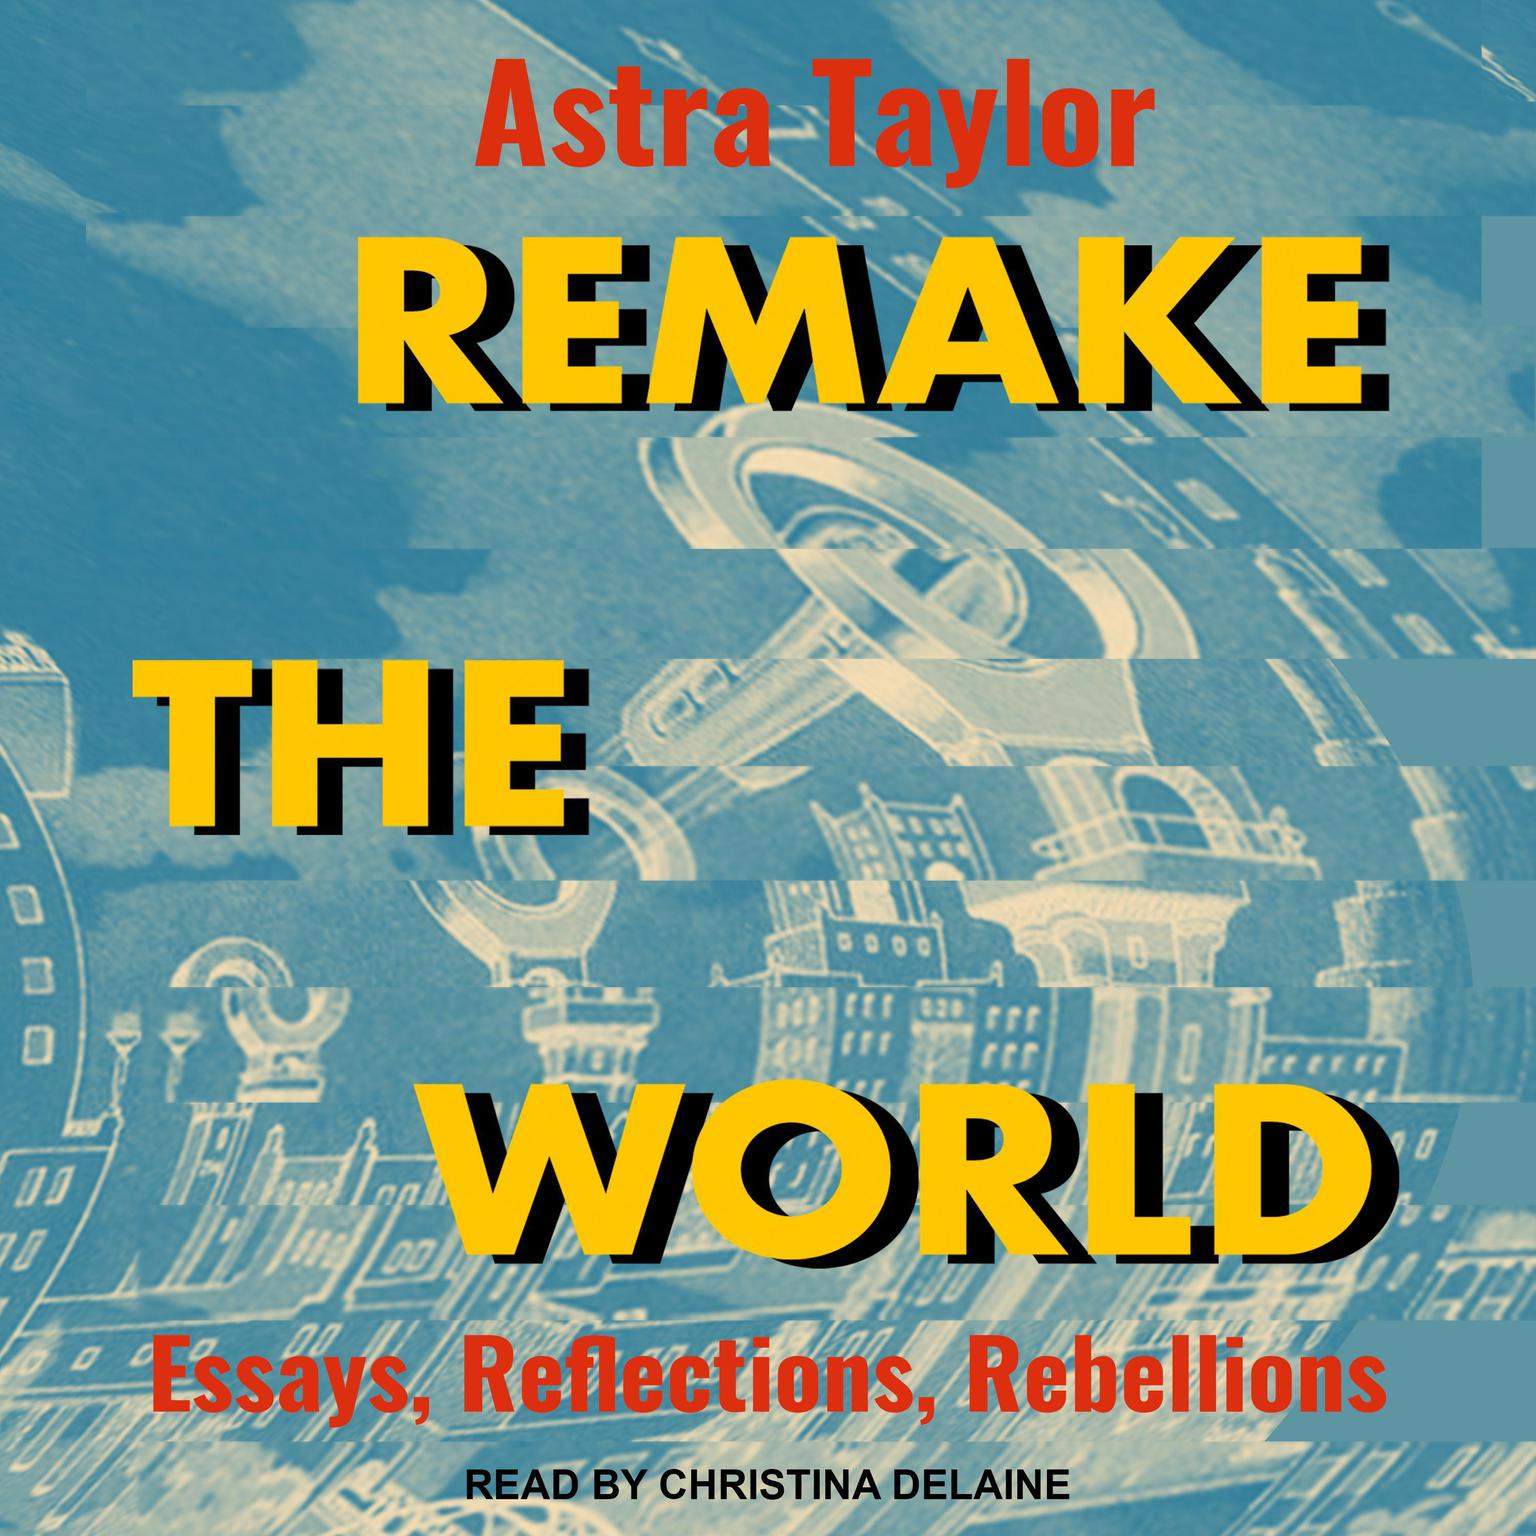 Remake the World: Essays, Reflections, Rebellions Audiobook, by Astra Taylor